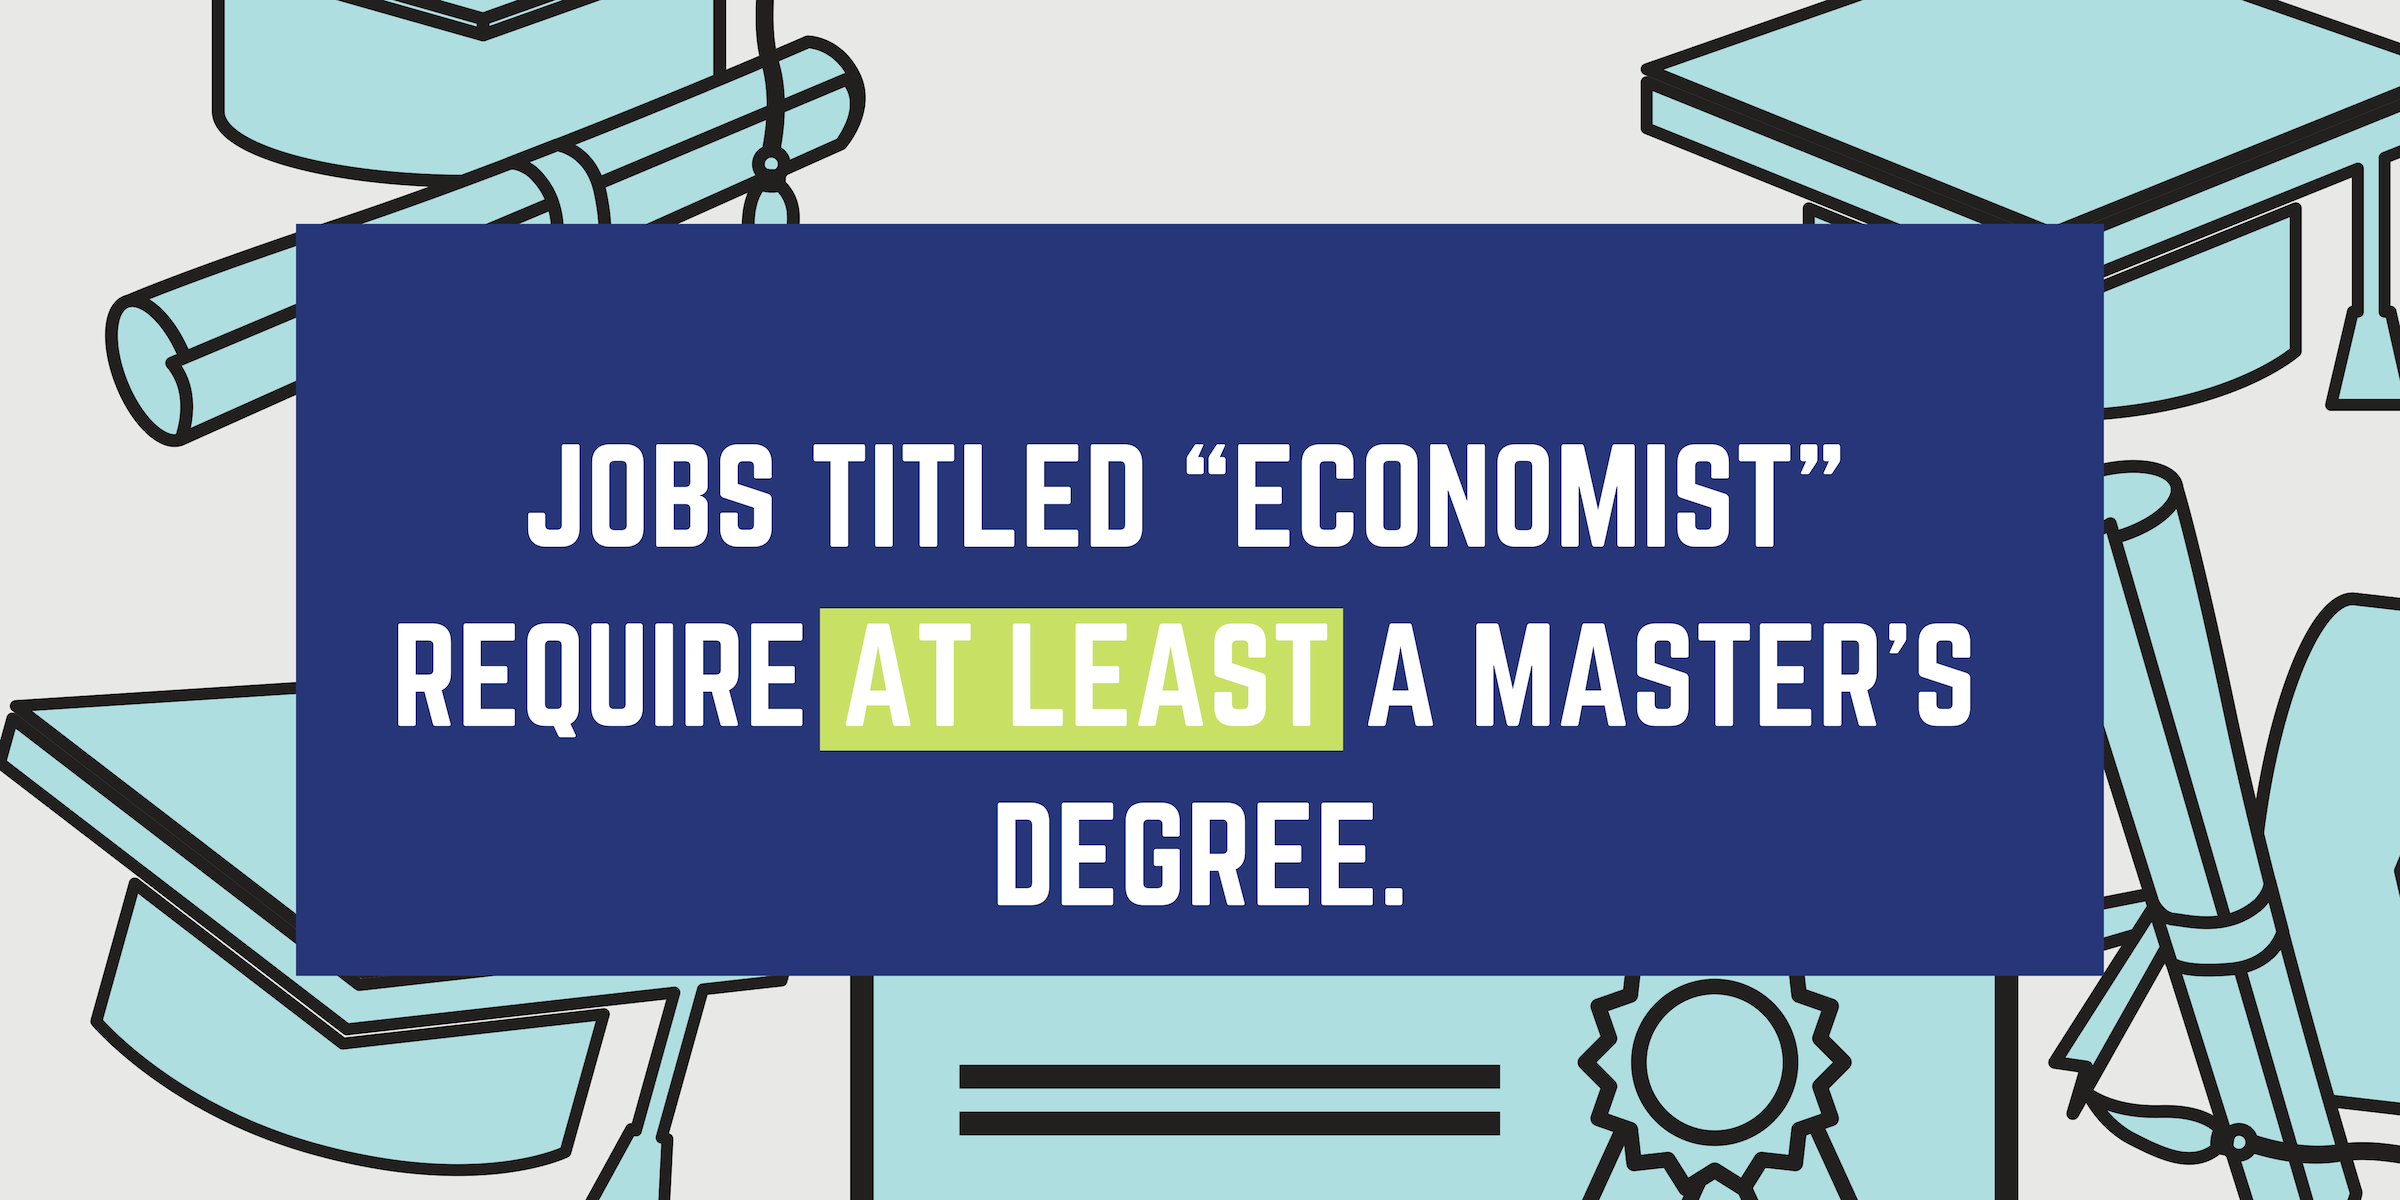 Jobs titled "economist" requite at least a Master's Degree.